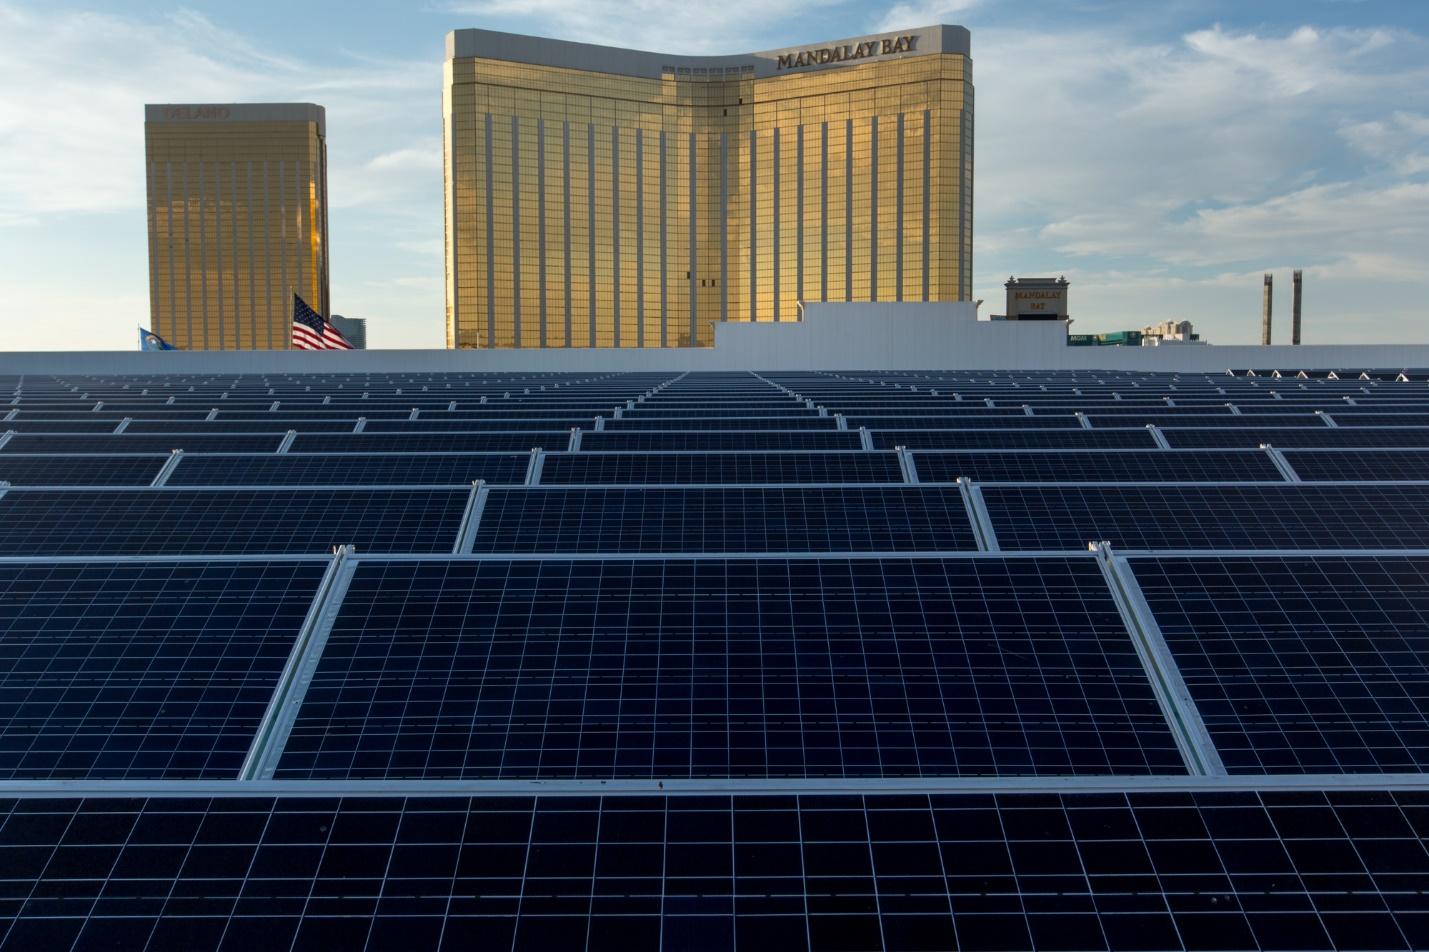 MGM Resorts 100-megawatt solar array; that’s the size that a regional or national utility would typically build – it has over 300,000 solar panels.